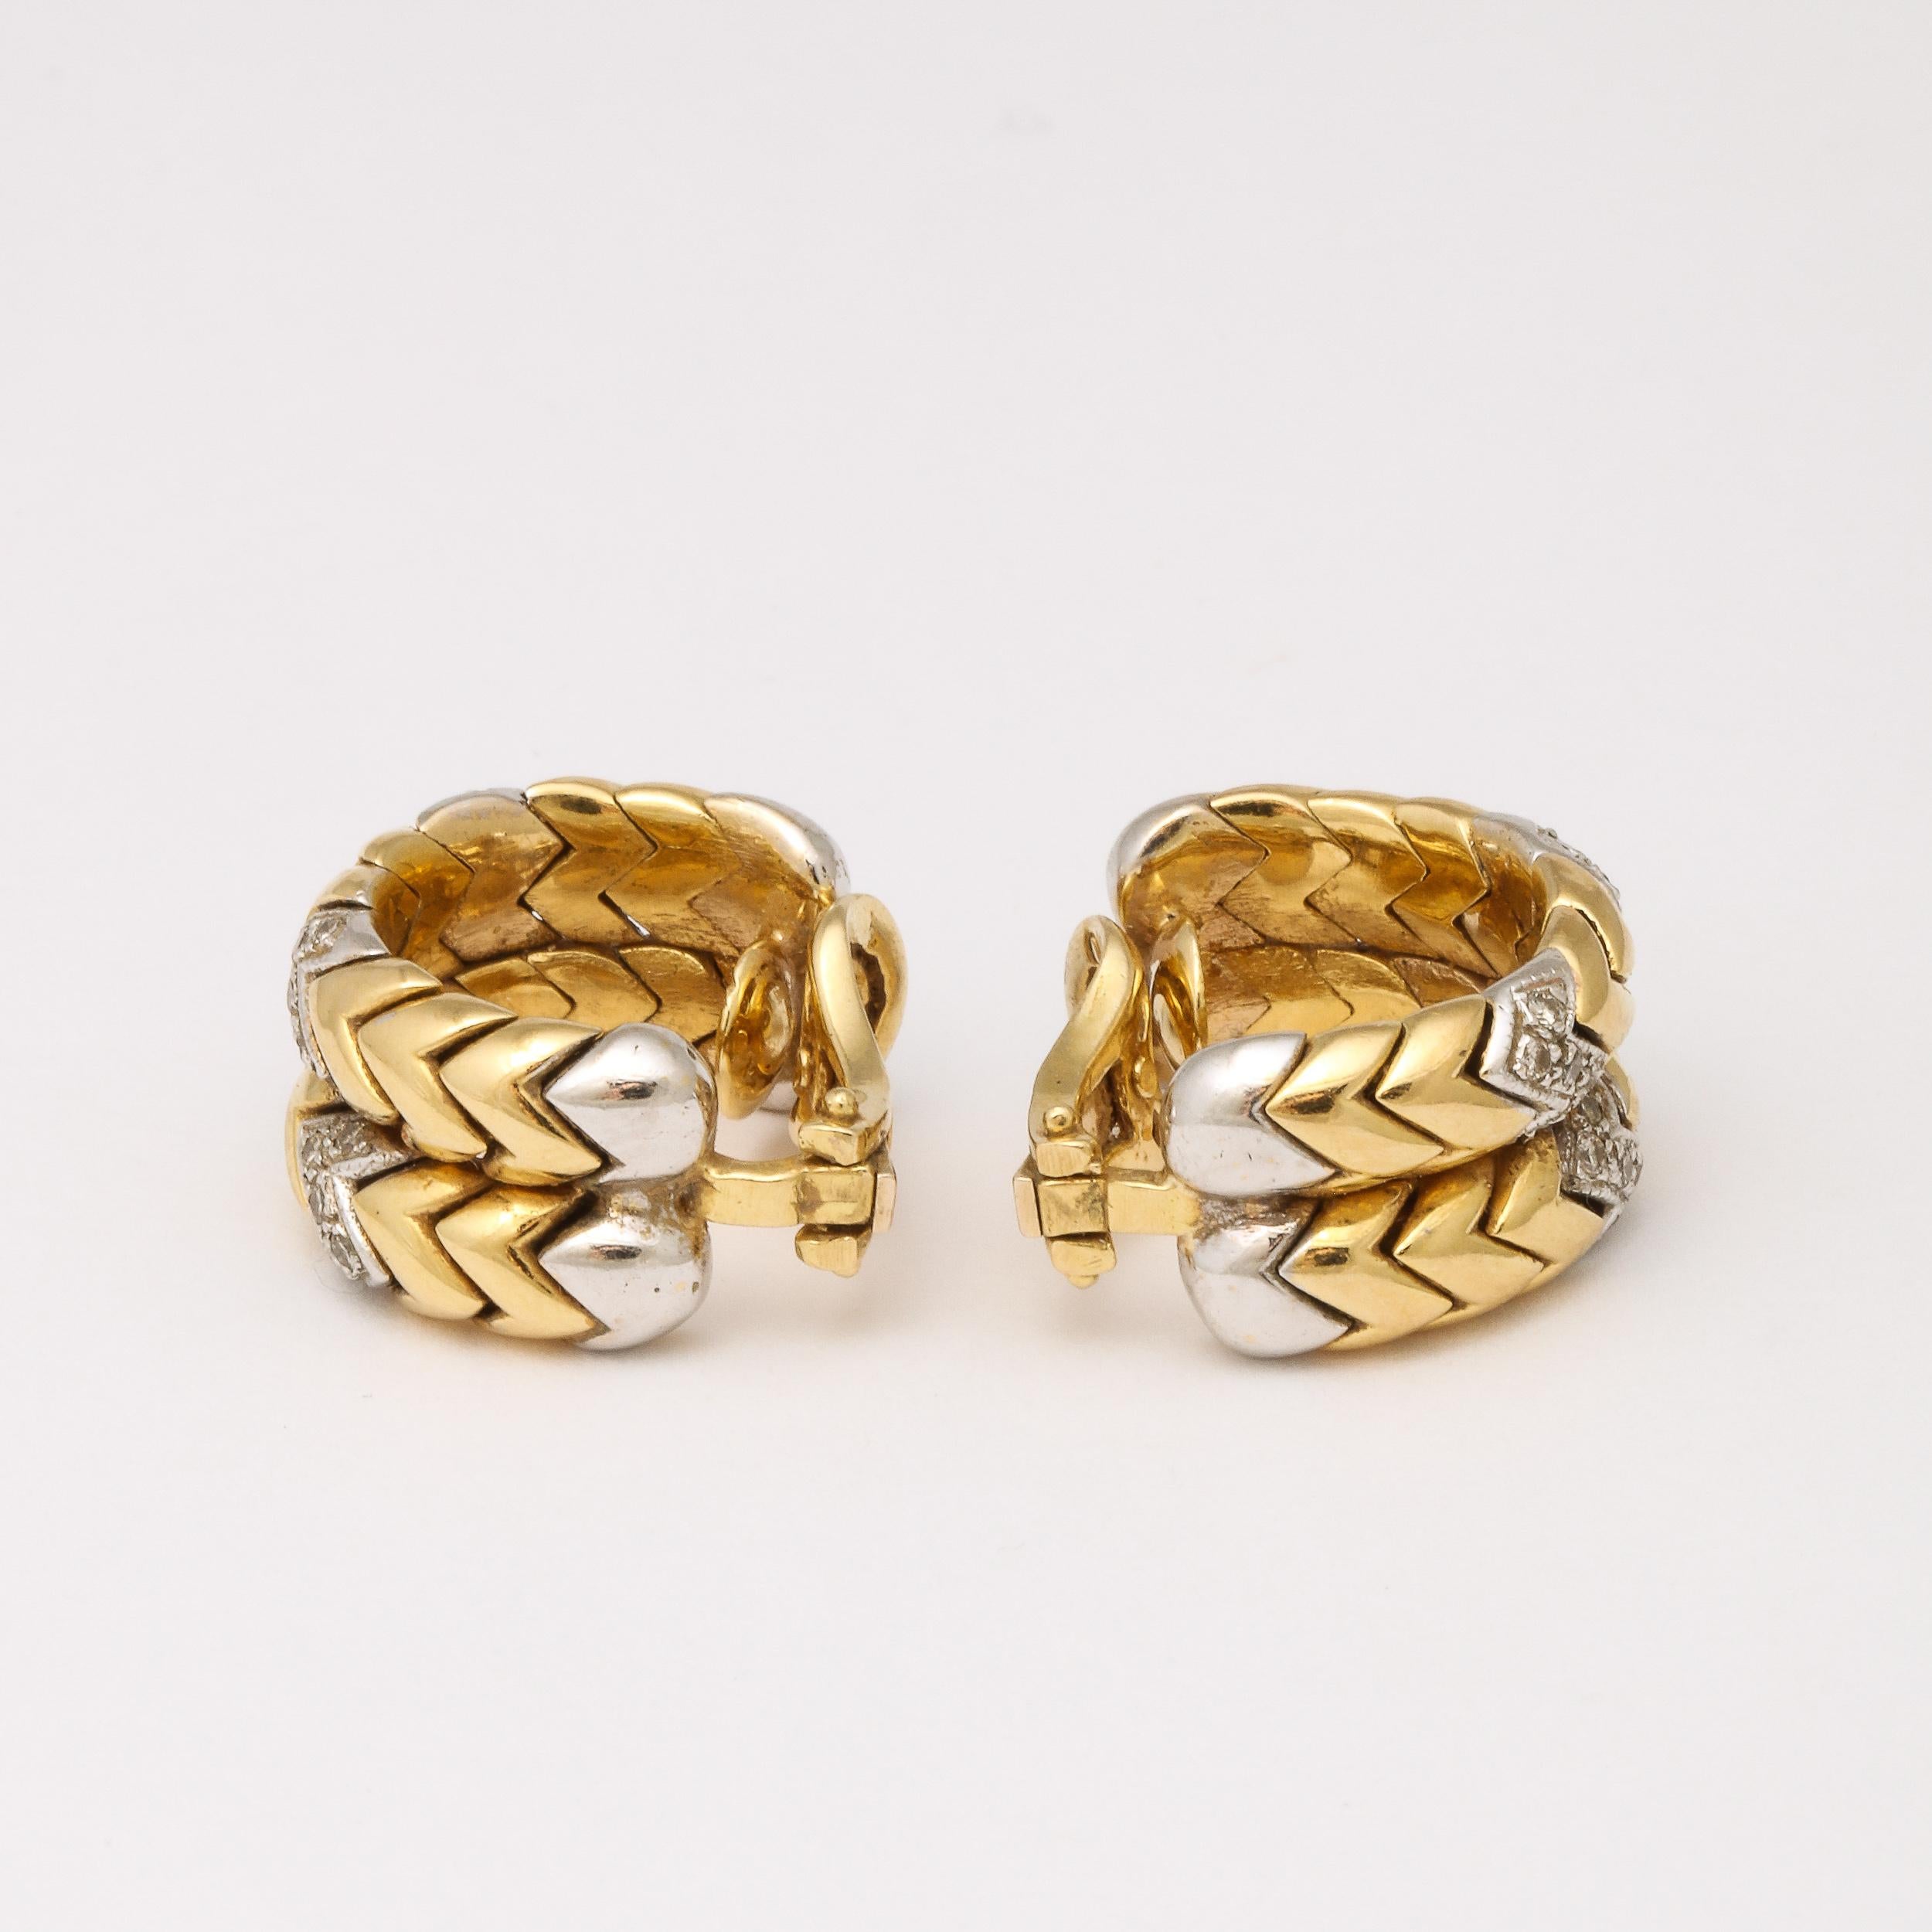 Modernist Pair of Midcentury 14 Carat Yellow and White Gold Earrings Inset with Diamonds For Sale